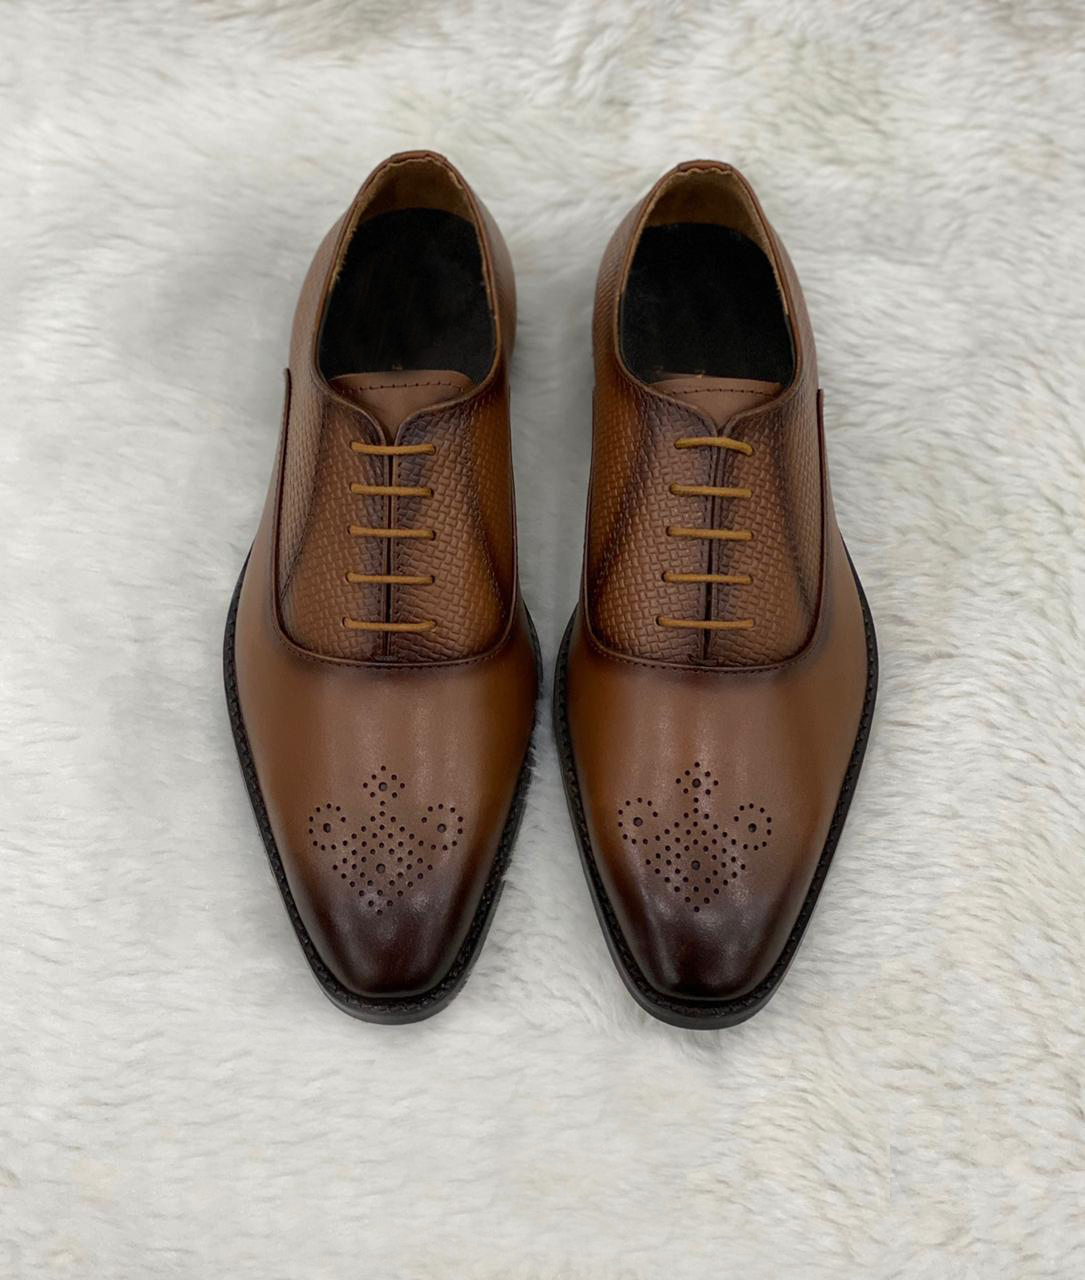 Stylish Brown Premium Quality Leather Formal Shoes For Men-Unique and Classy